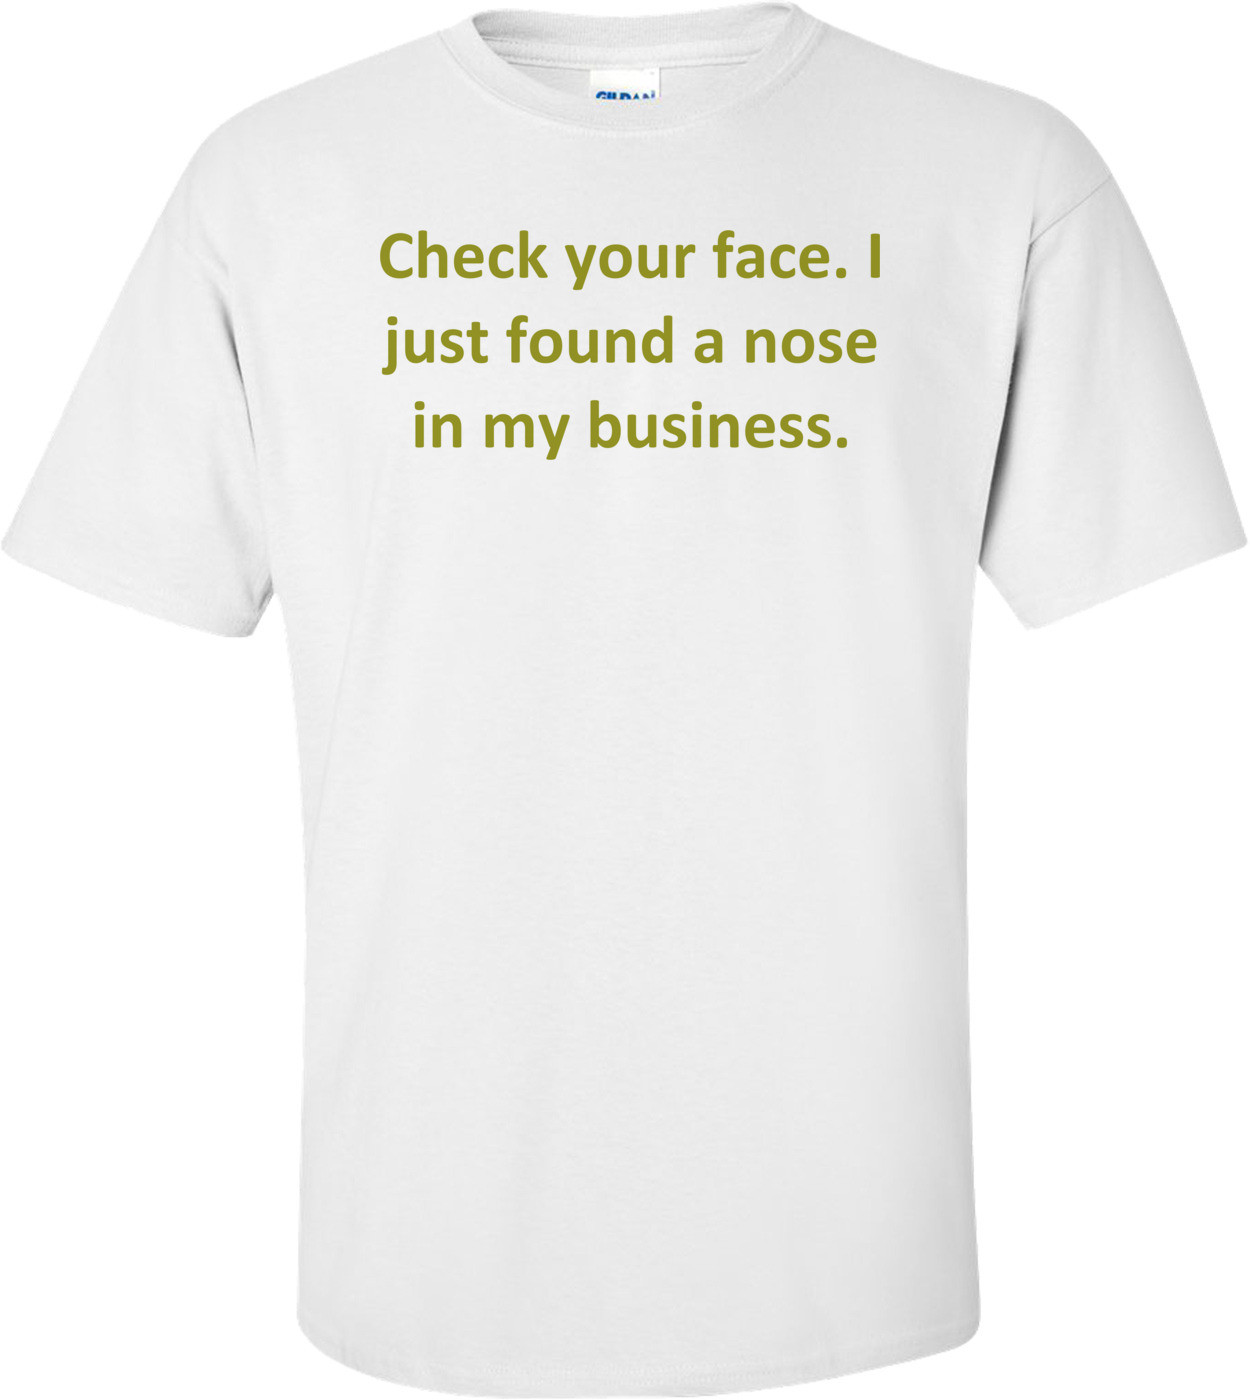 Check your face. I just found a nose in my business. Shirt